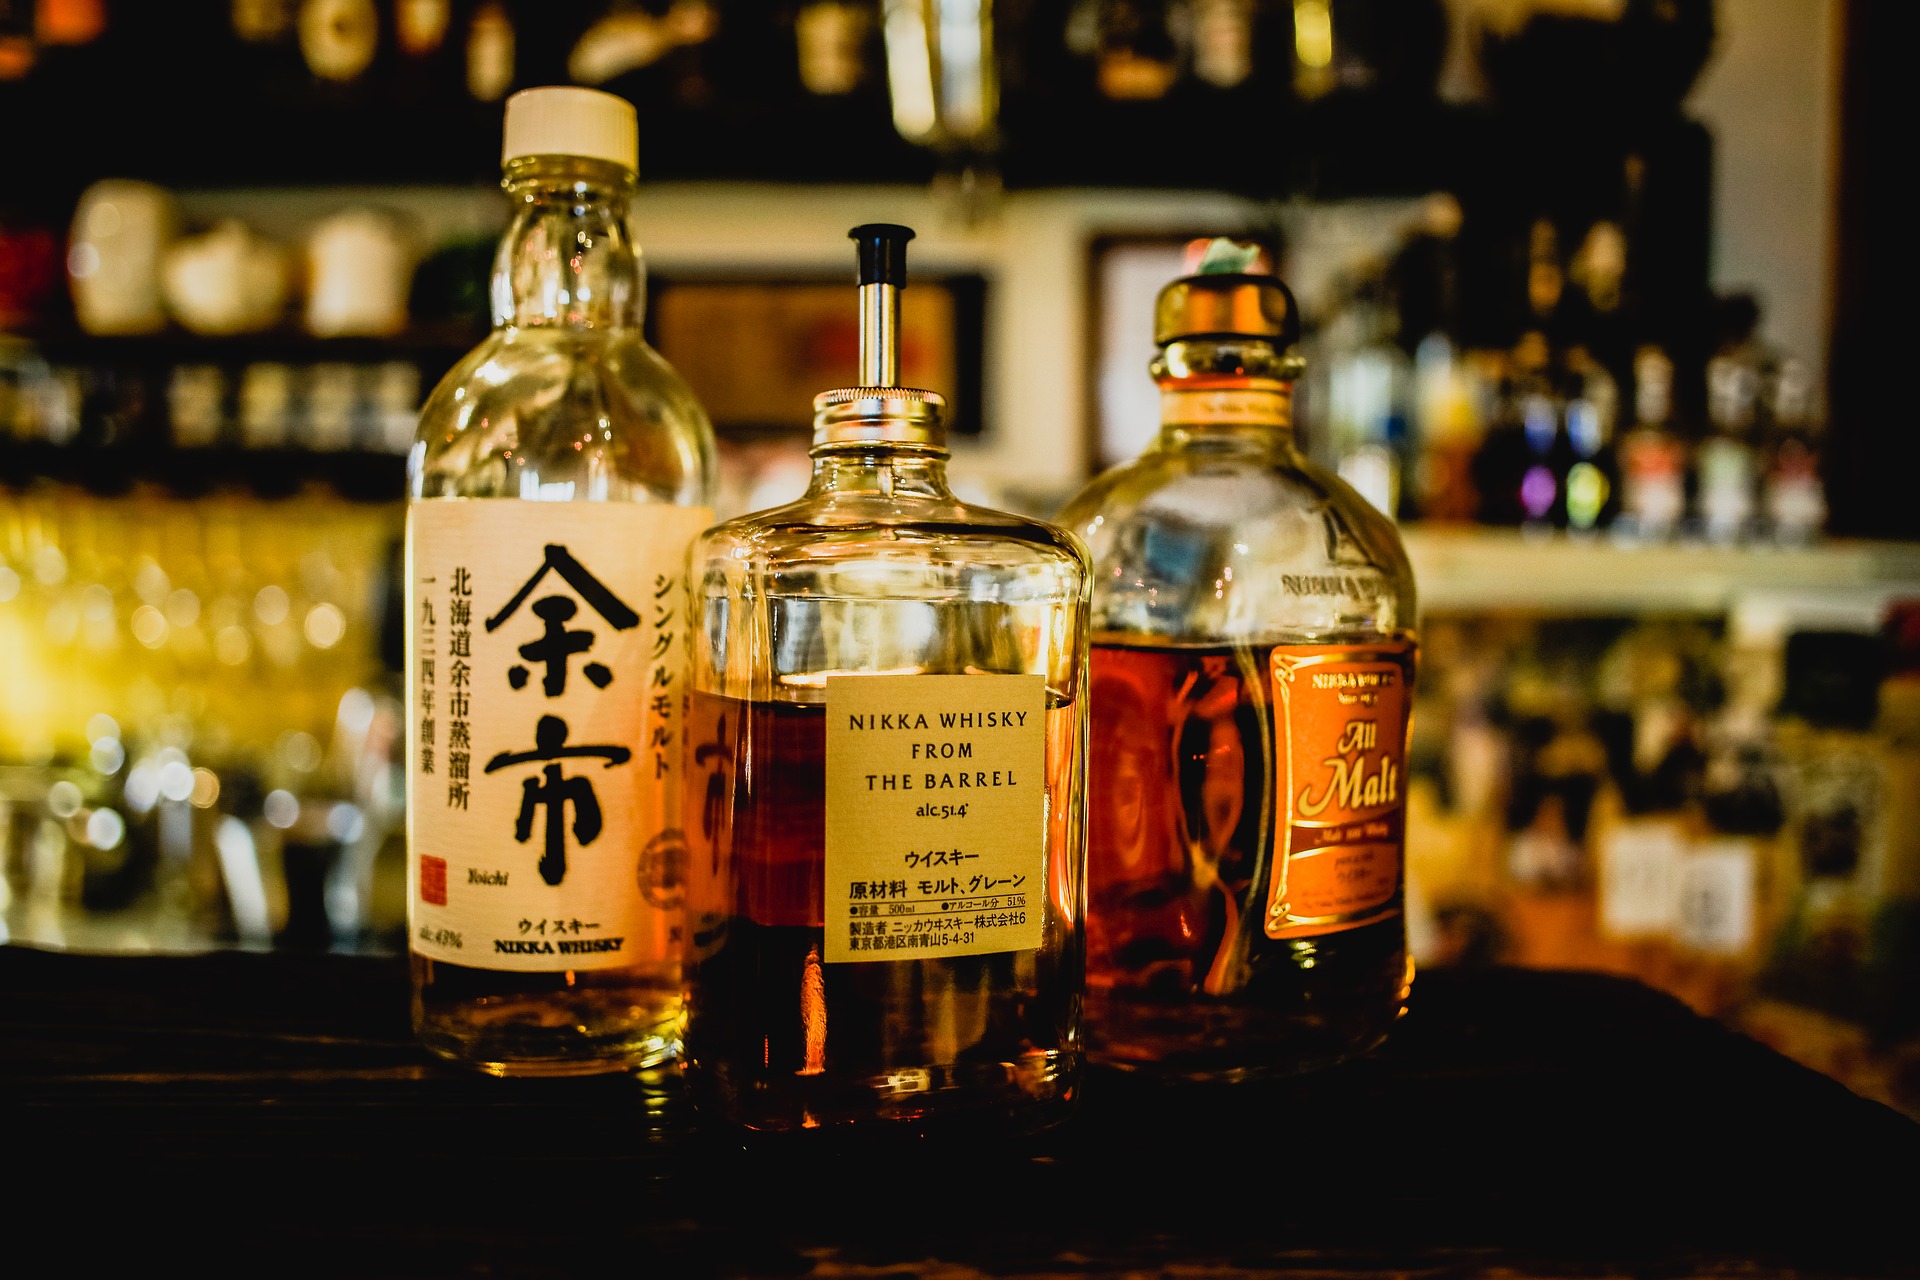 Selection of fine Japanese Whiskies